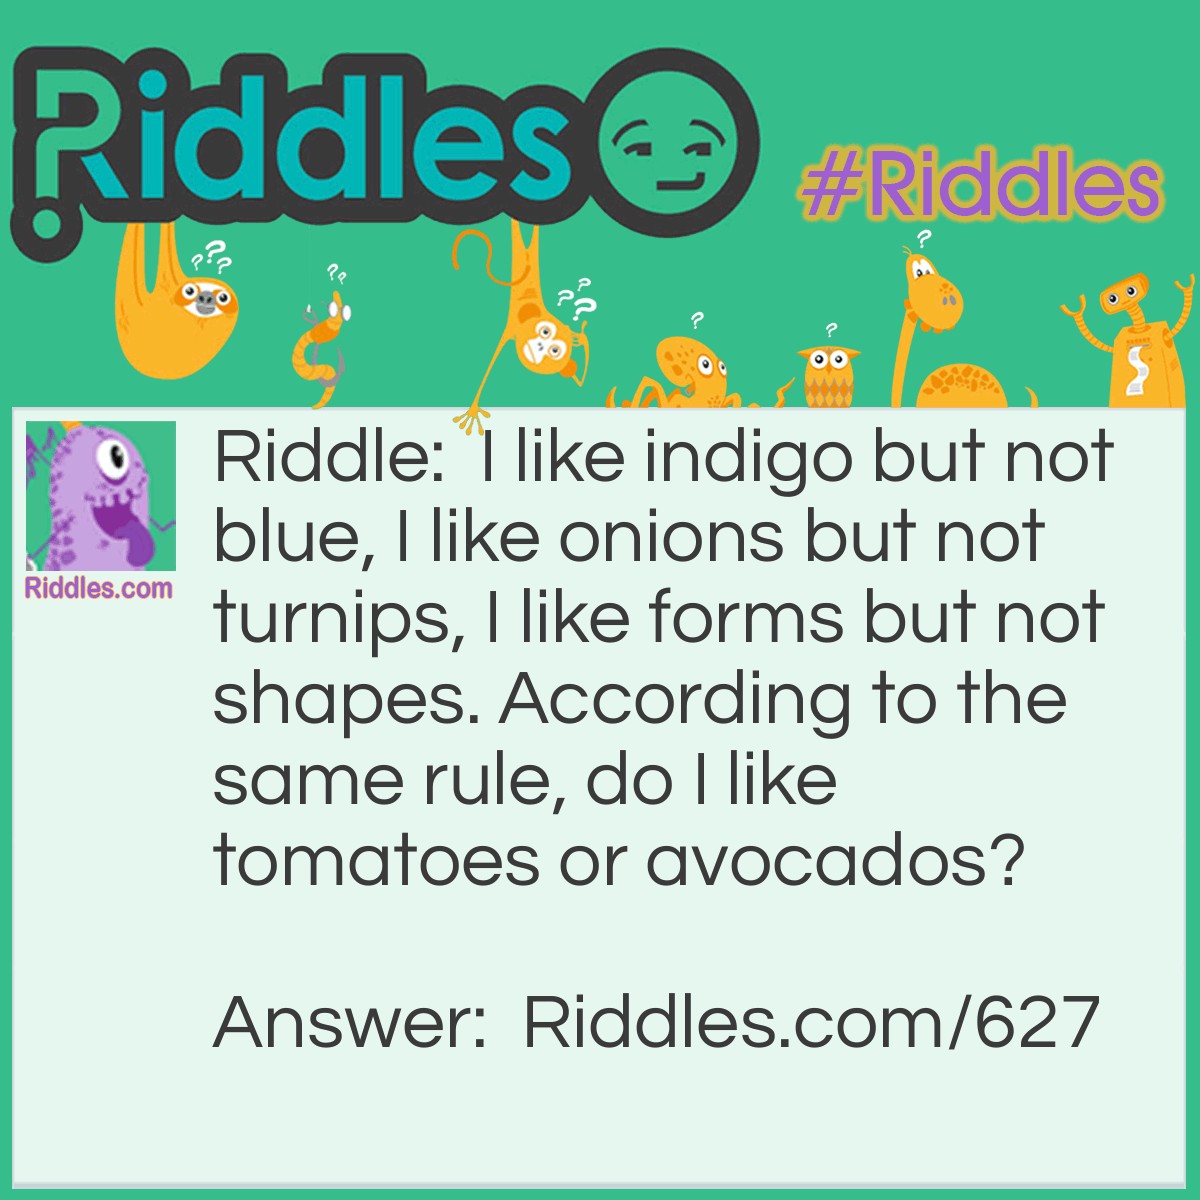 Riddle: I like indigo but not blue, I like onions but not turnips, I like forms but not shapes. According to the same rule, do I like tomatoes or avocados? Answer: Avocadoes - I like all things that start with a preposition.